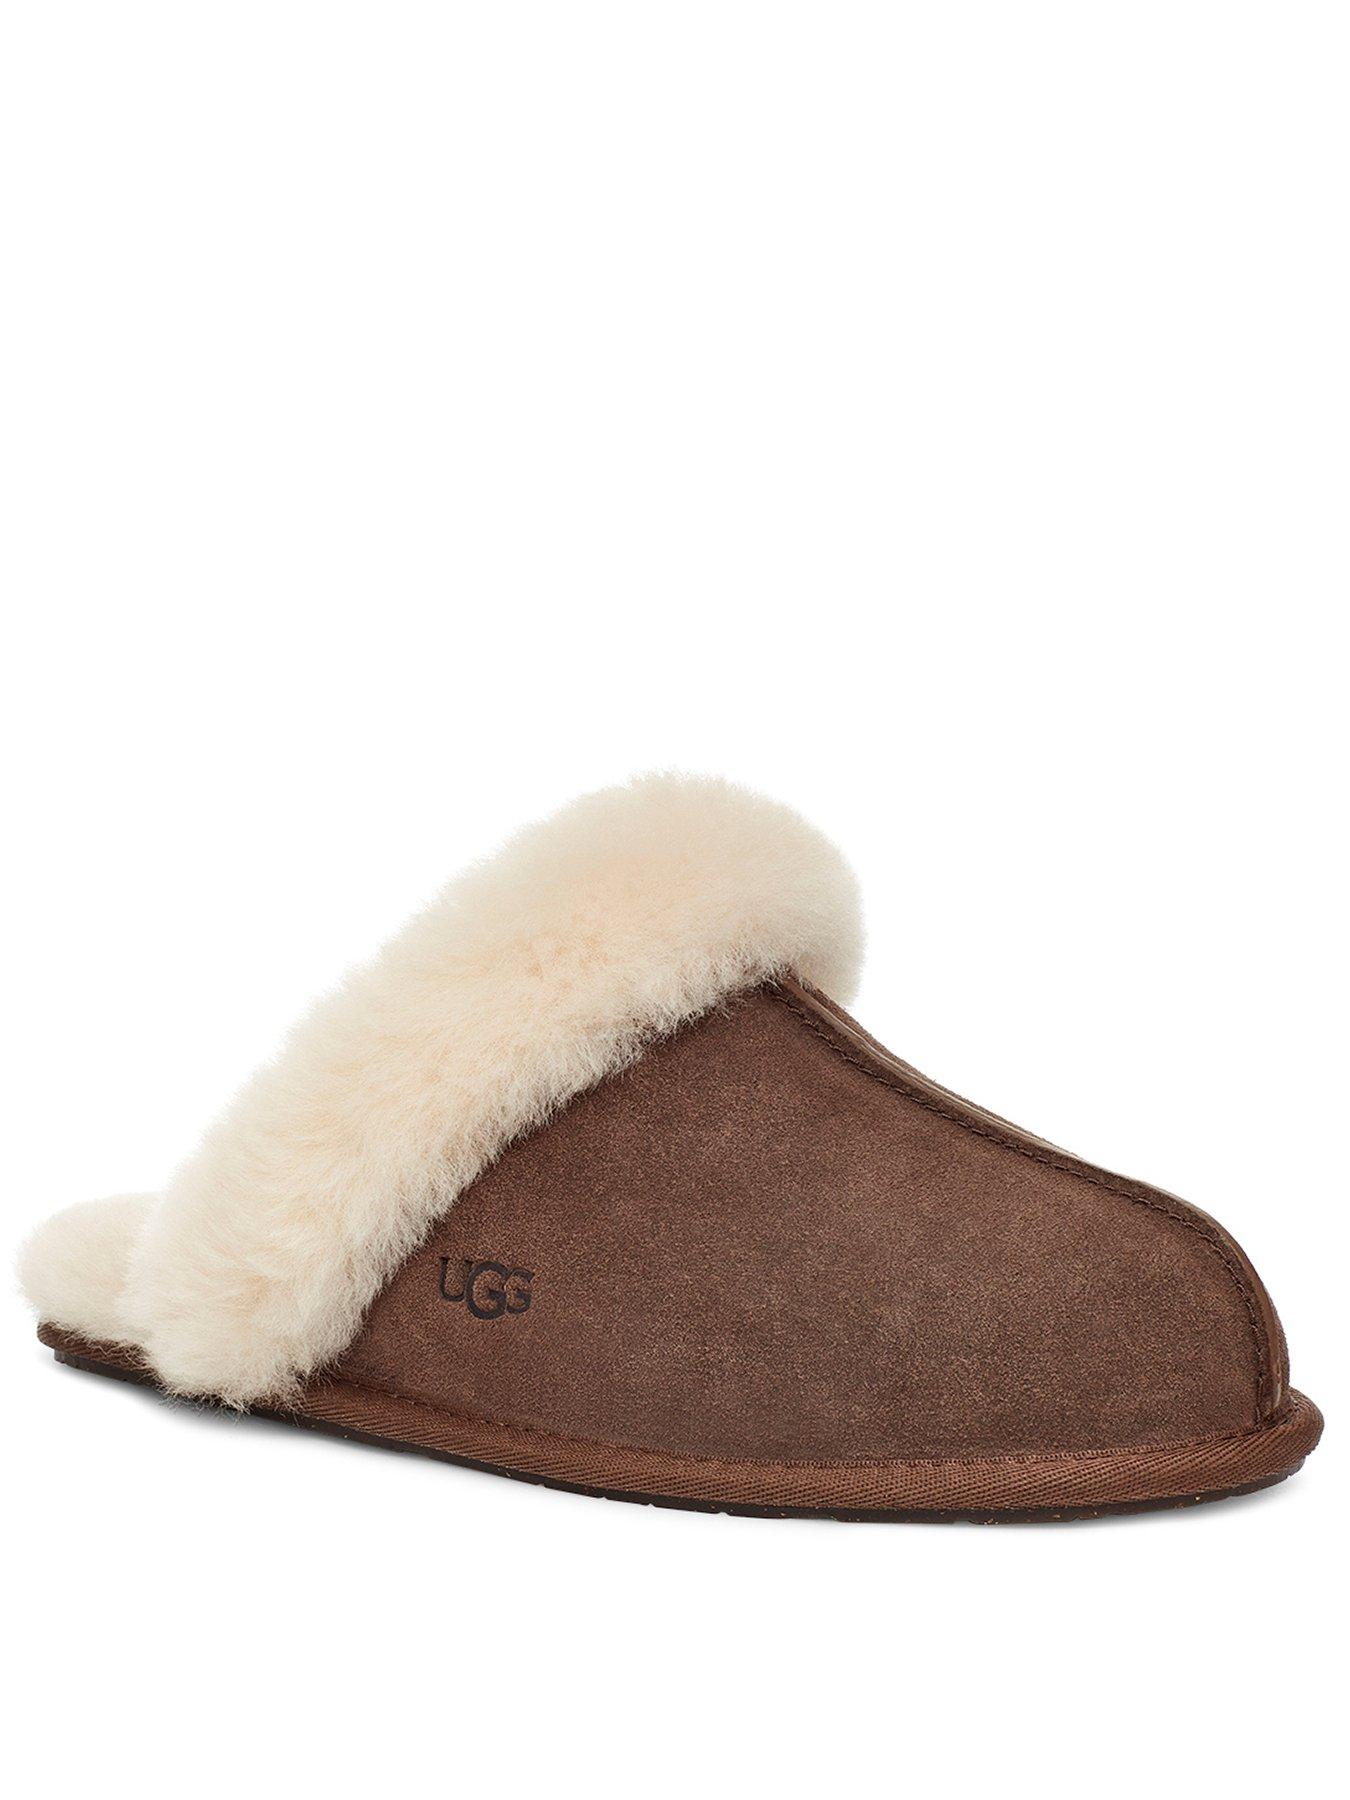 suede womens ugg slippers